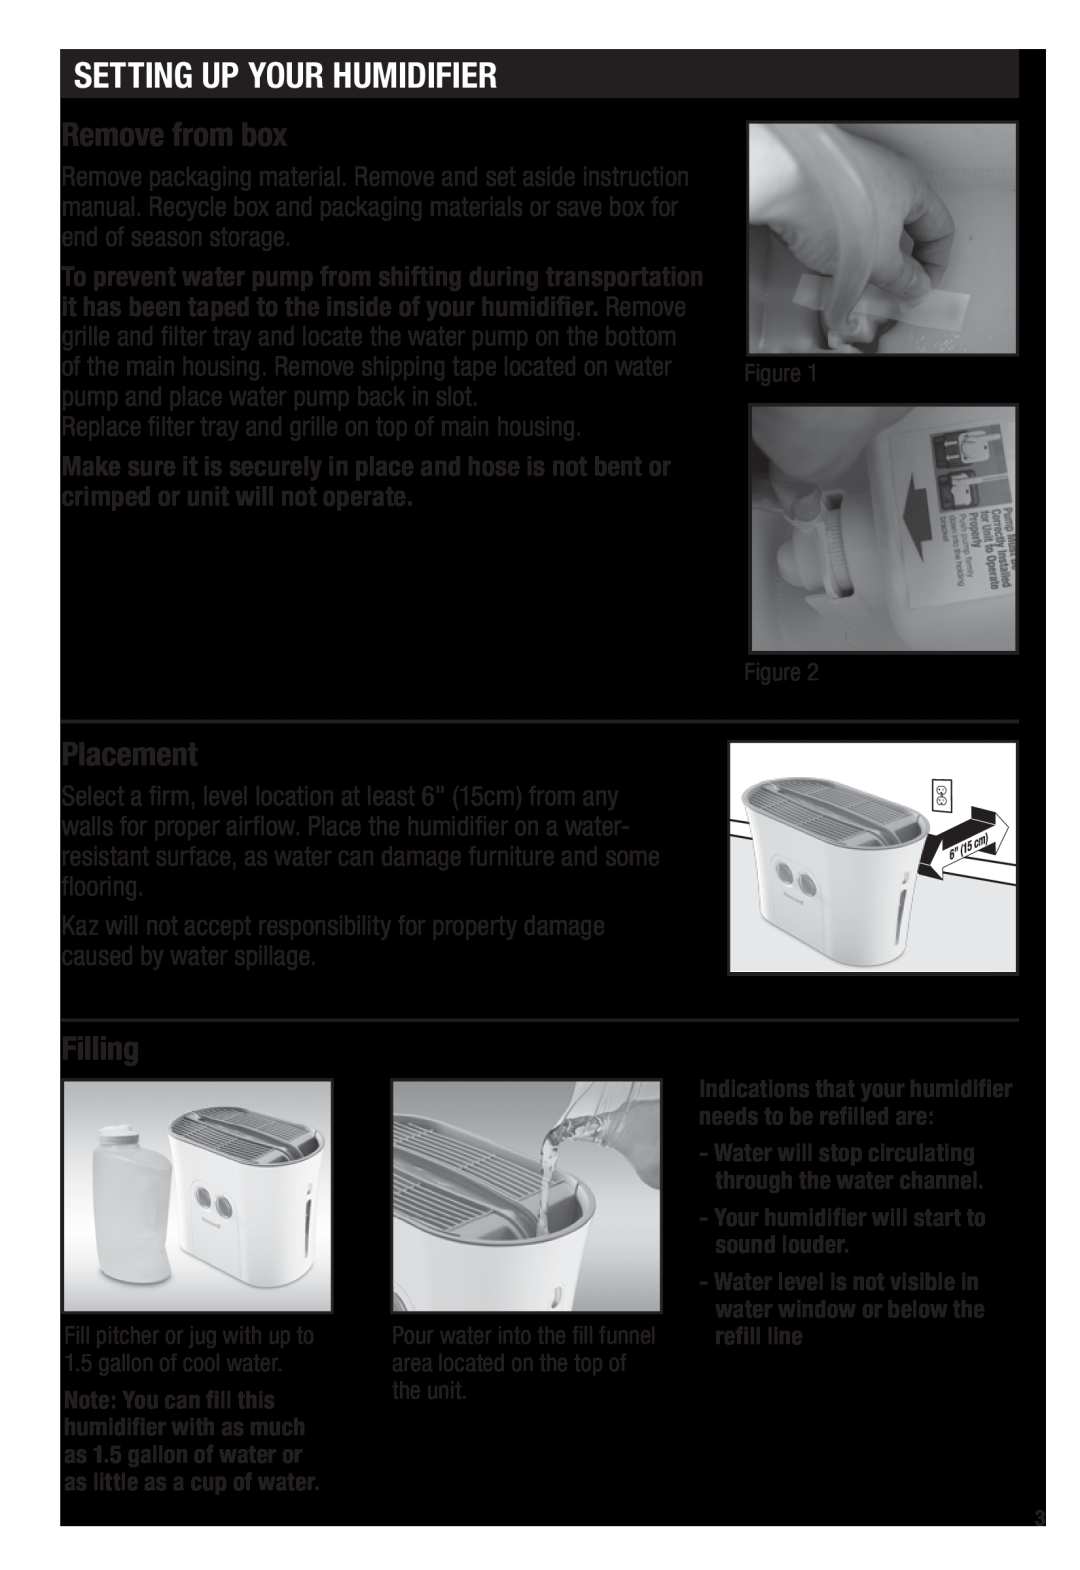 Honeywell HCM-750 important safety instructions Setting Up Your Humidifier, Remove from box, Placement, Filling 